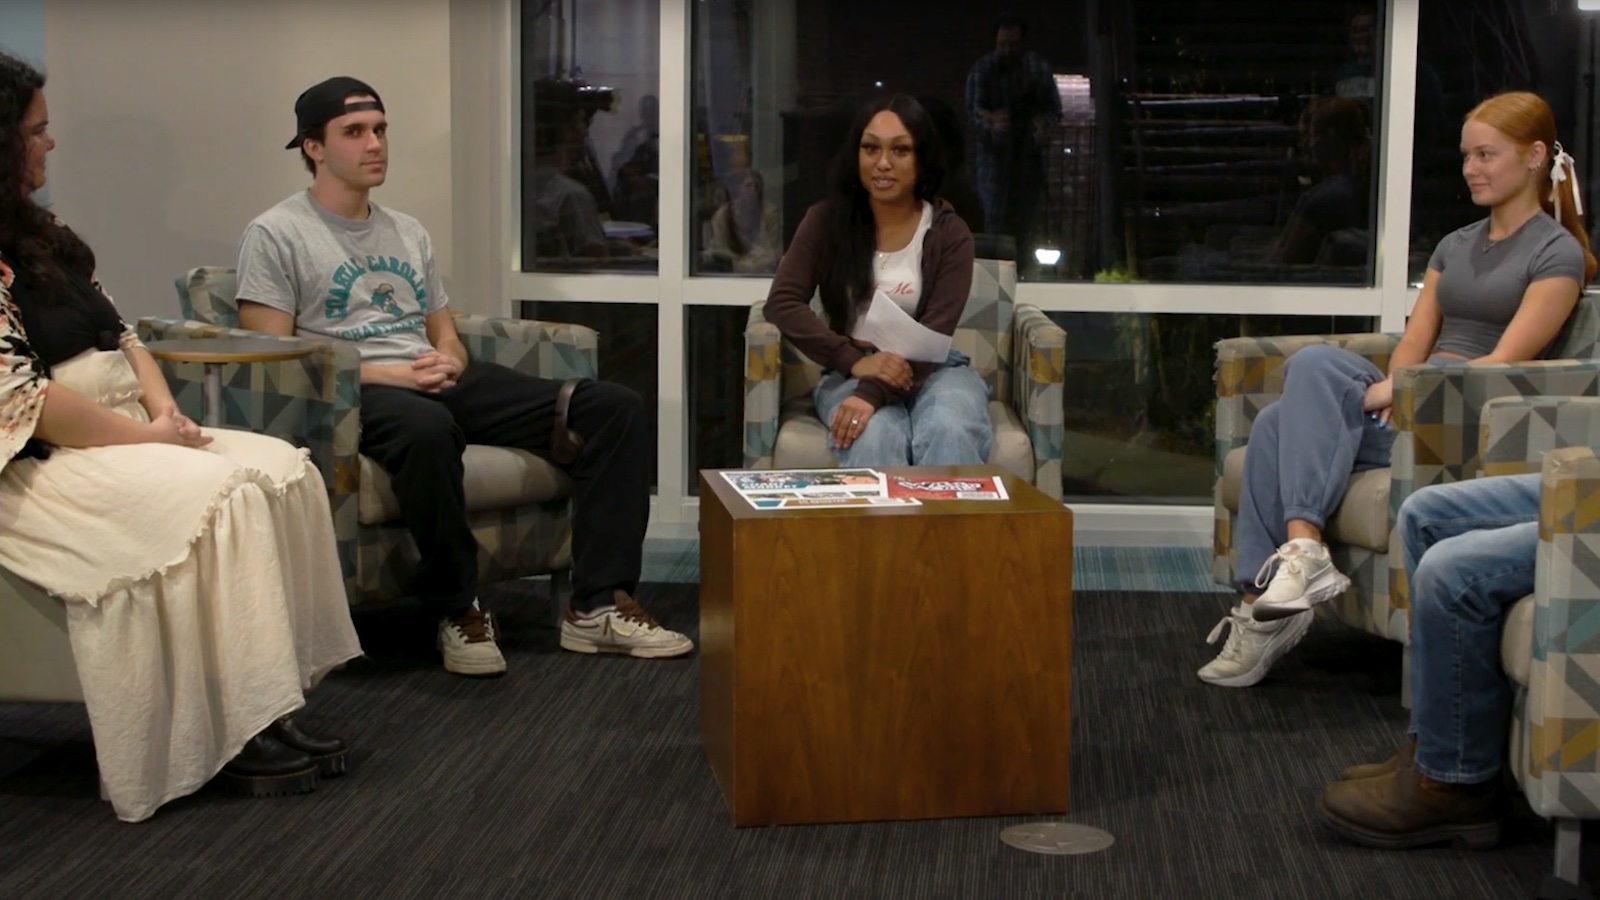 Four students (and a fifth offscreen) sit in teal chairs pulled into a semi-circle. Two are seniors, two are freshman, and one is a moderator.